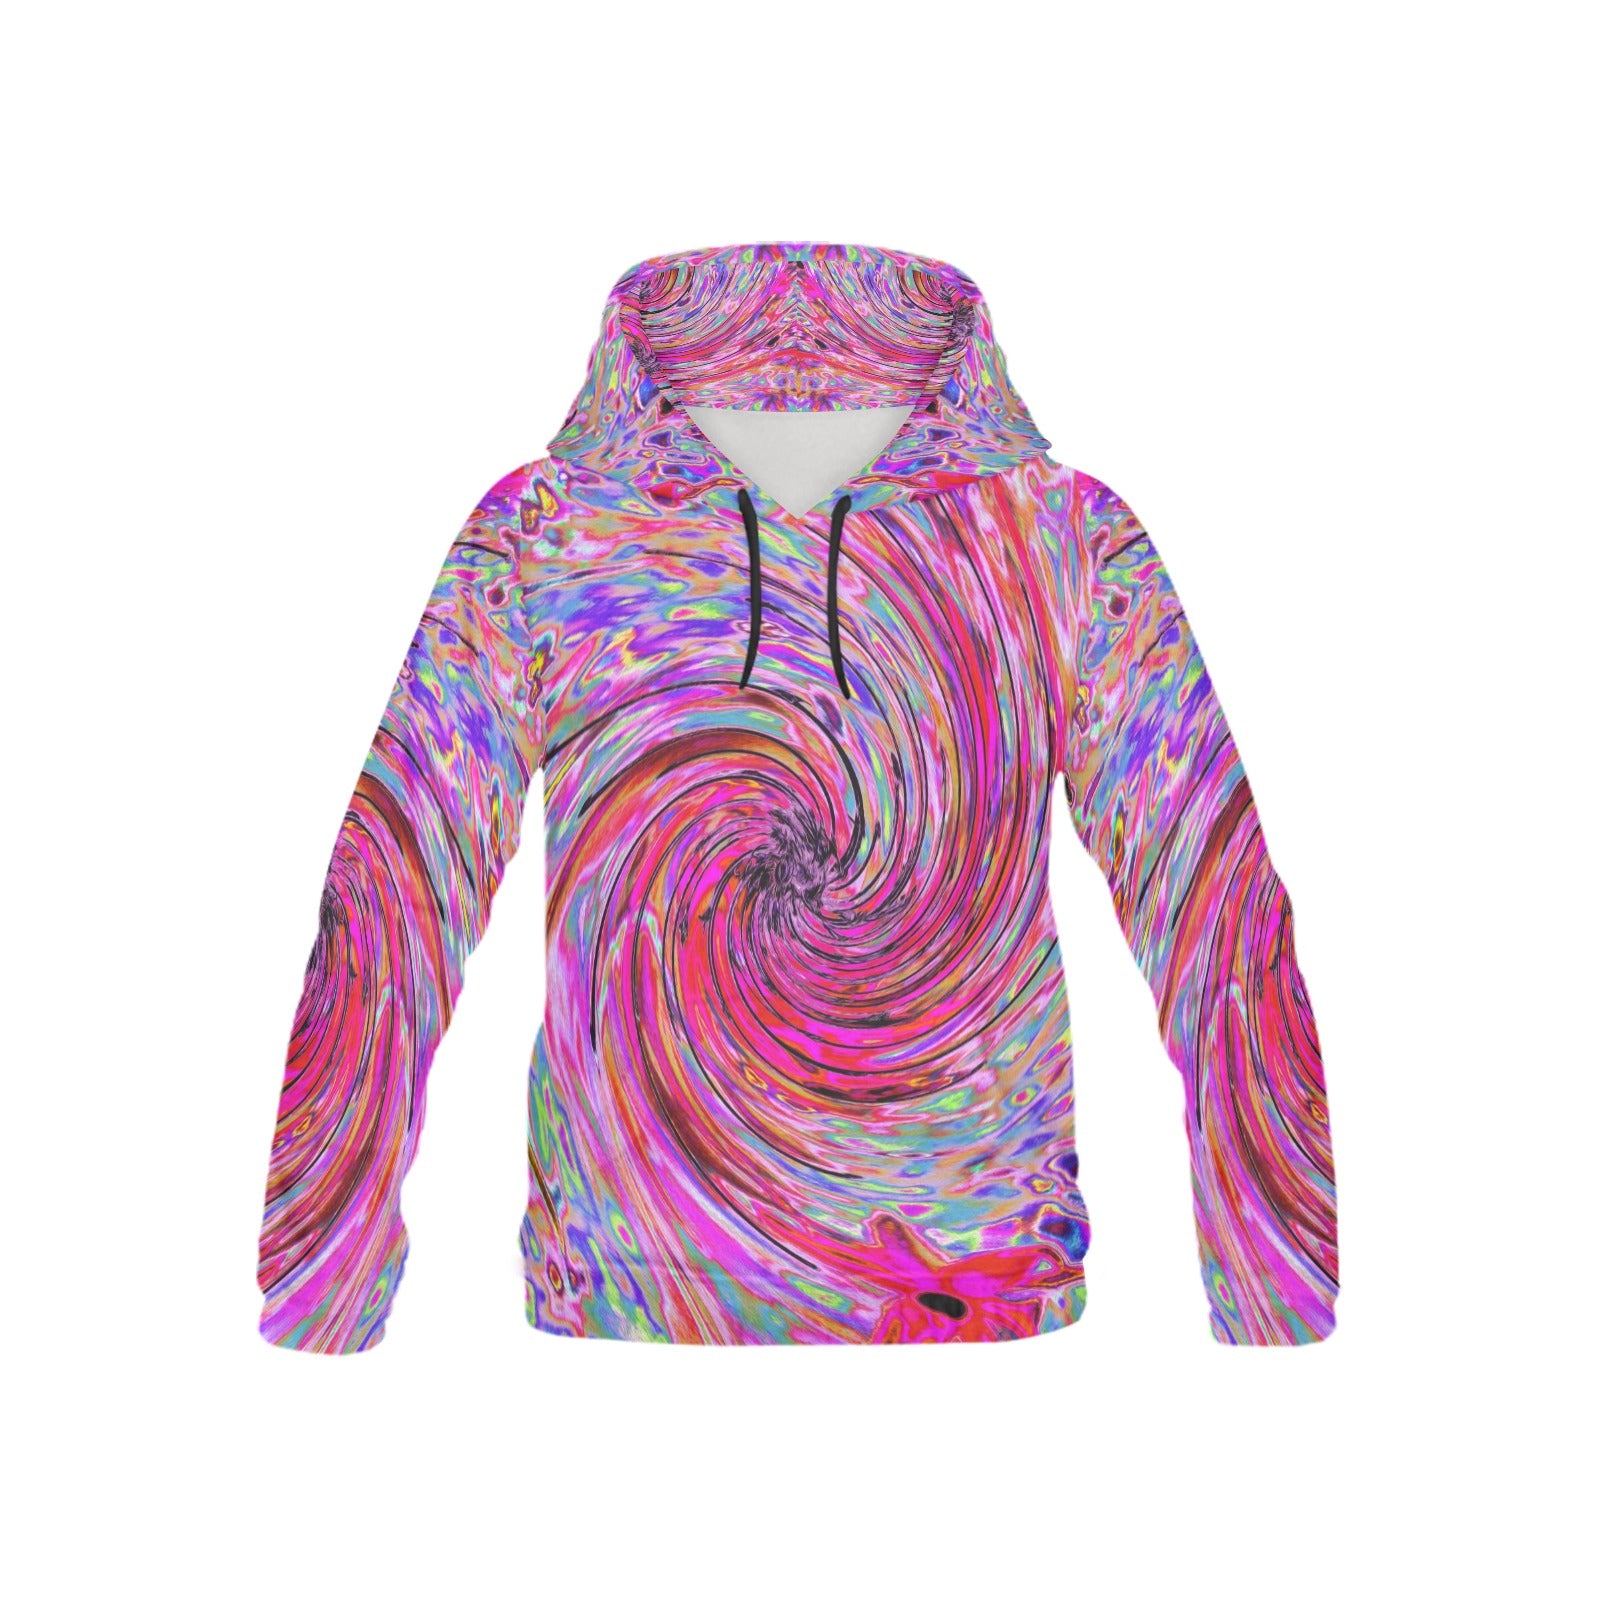 Hoodies for Kids, Cool Abstract Retro Hot Pink and Red Floral Swirl